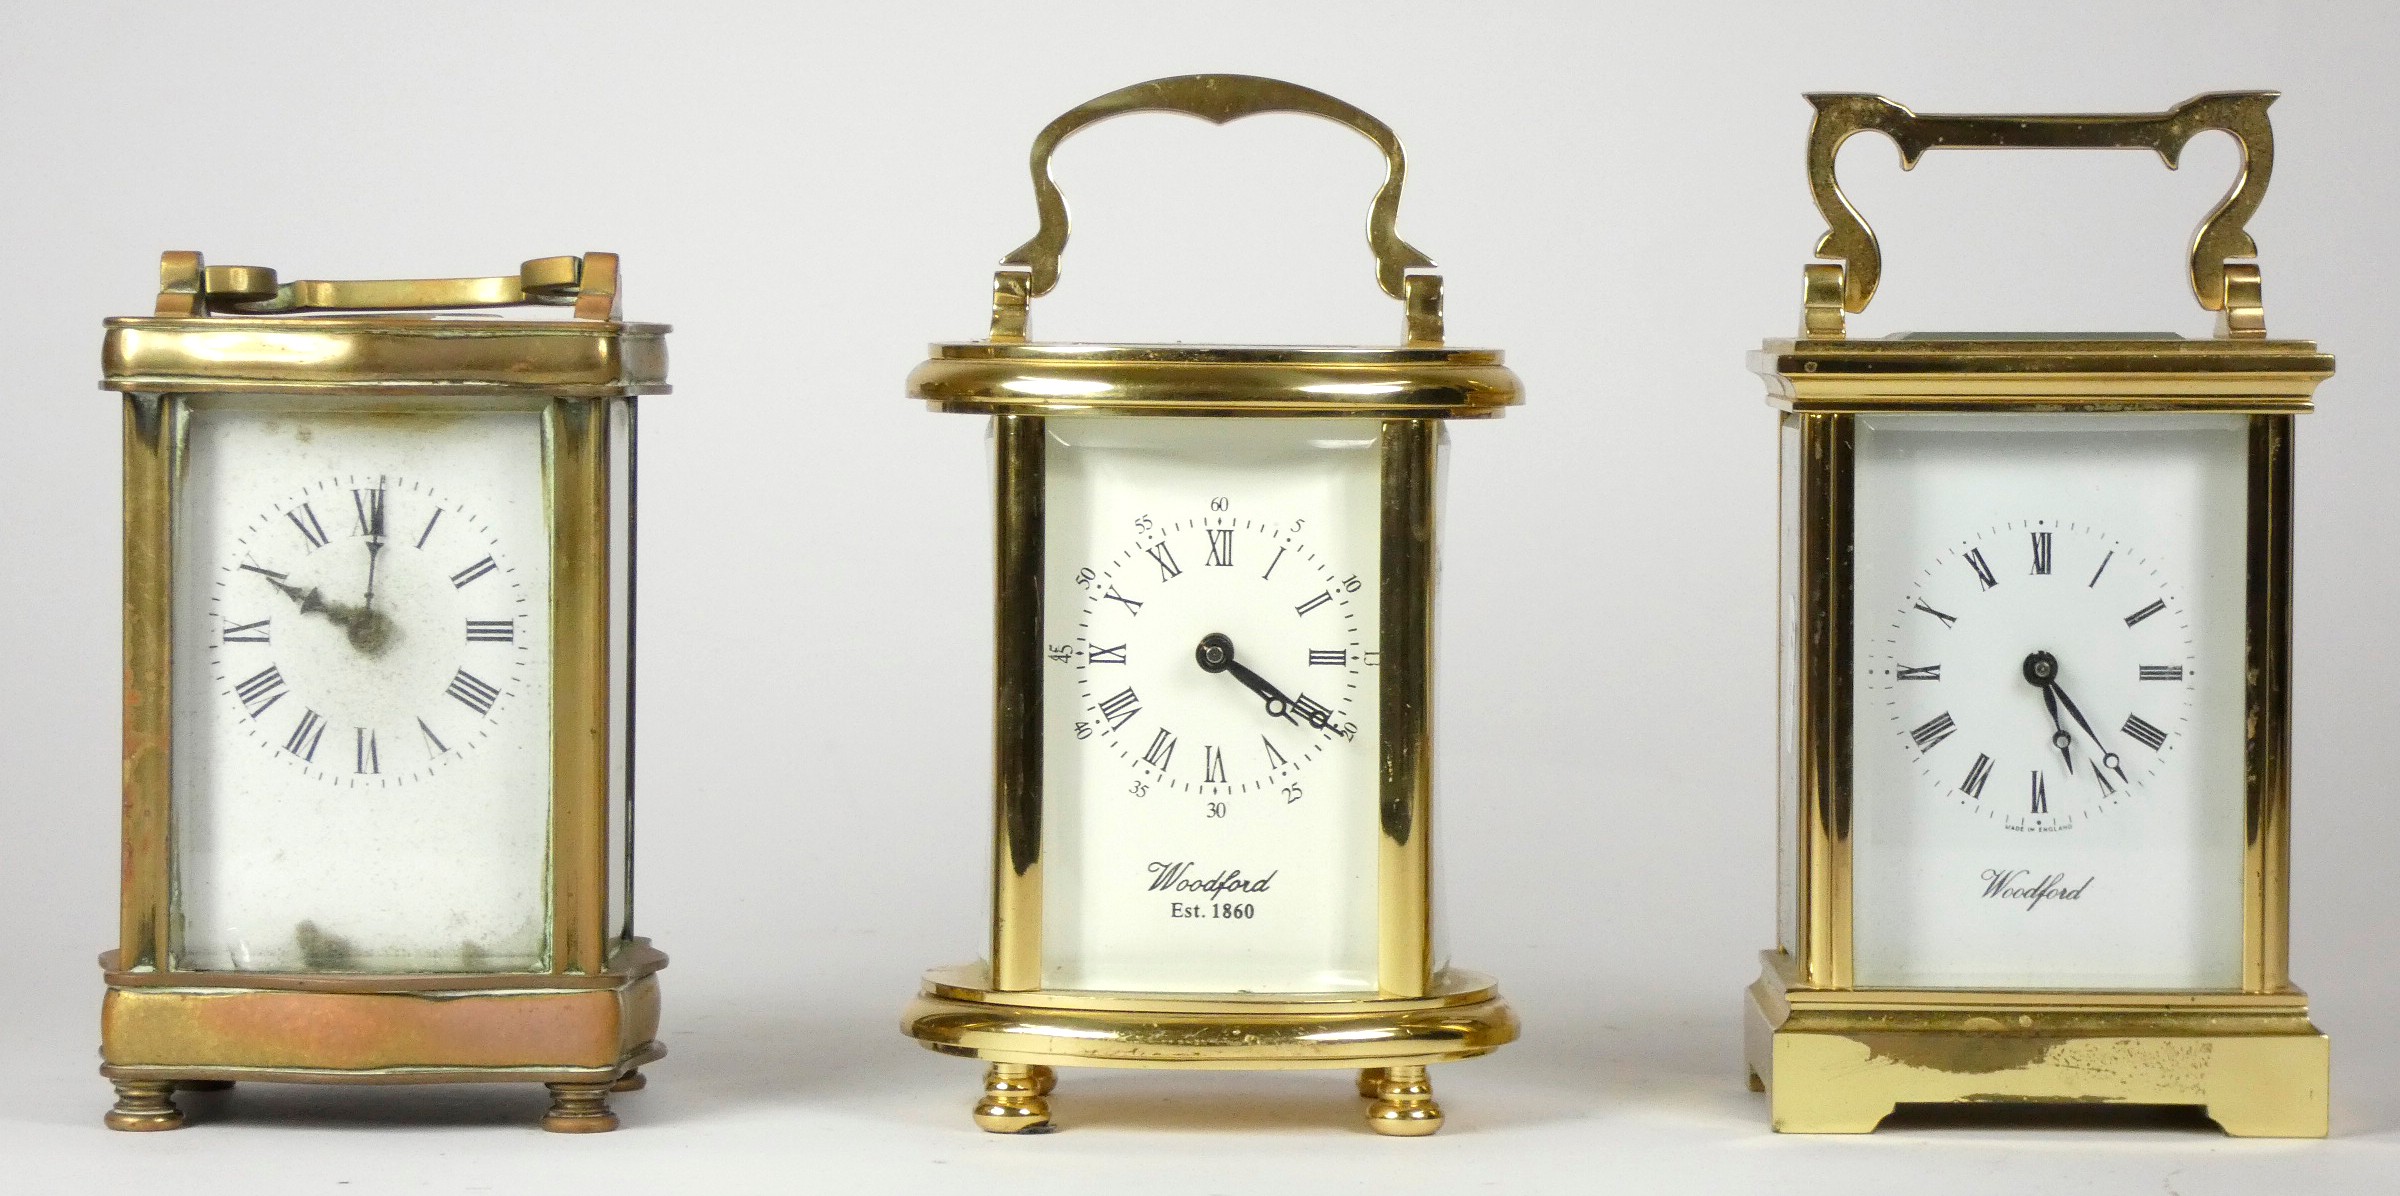 Three mid 20th Century brass carriage clocks, white enameled dials with Roman numerals, beveled edge